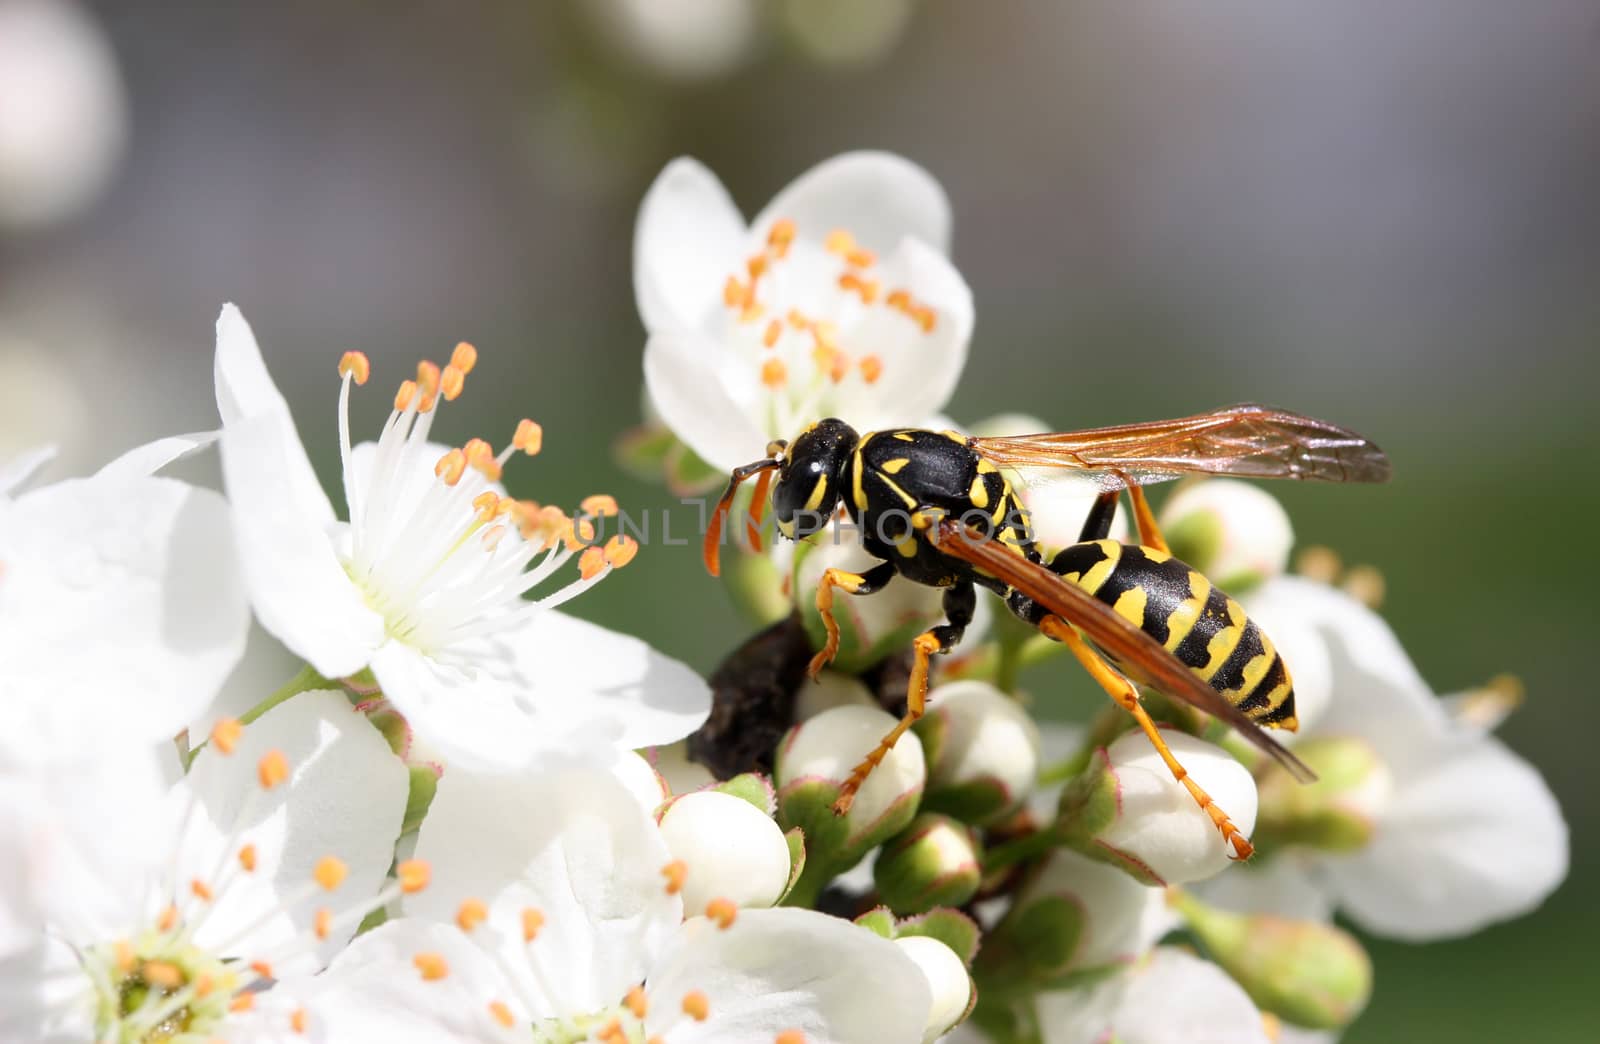 Closeup of yellow wasp on the blossom